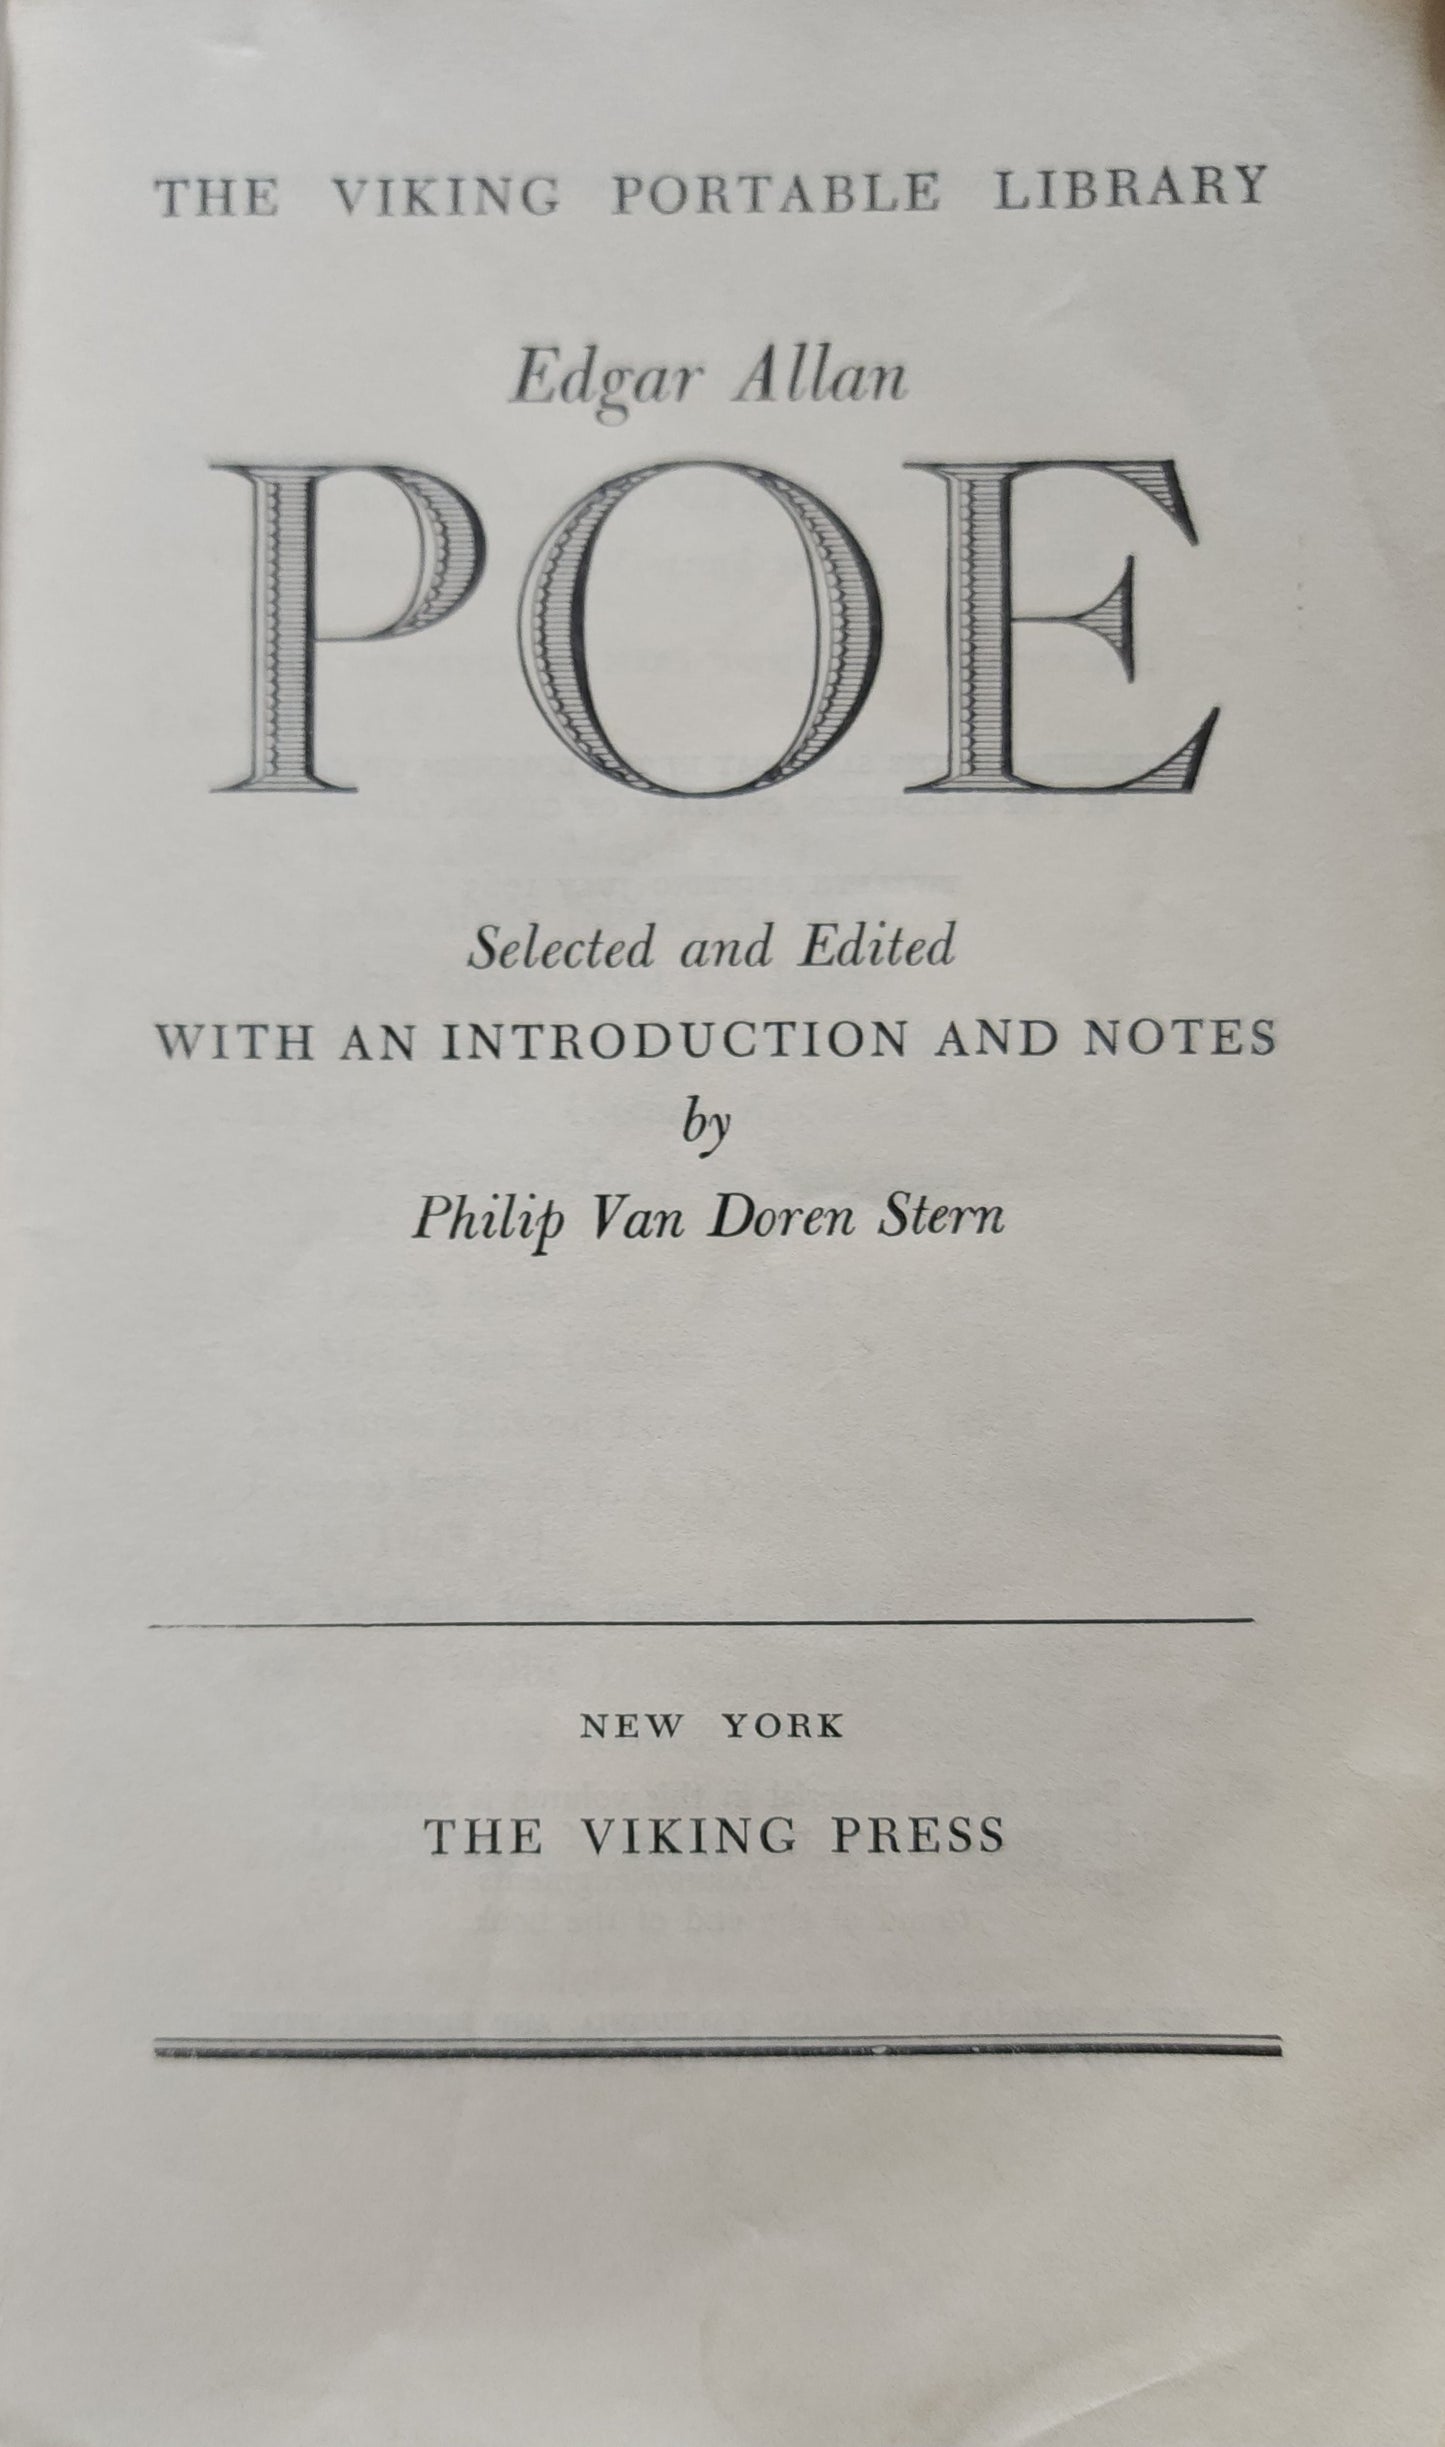 The Portable Poe Selected by
Philip Van Doren Stern The Viking Press Paperback 1945